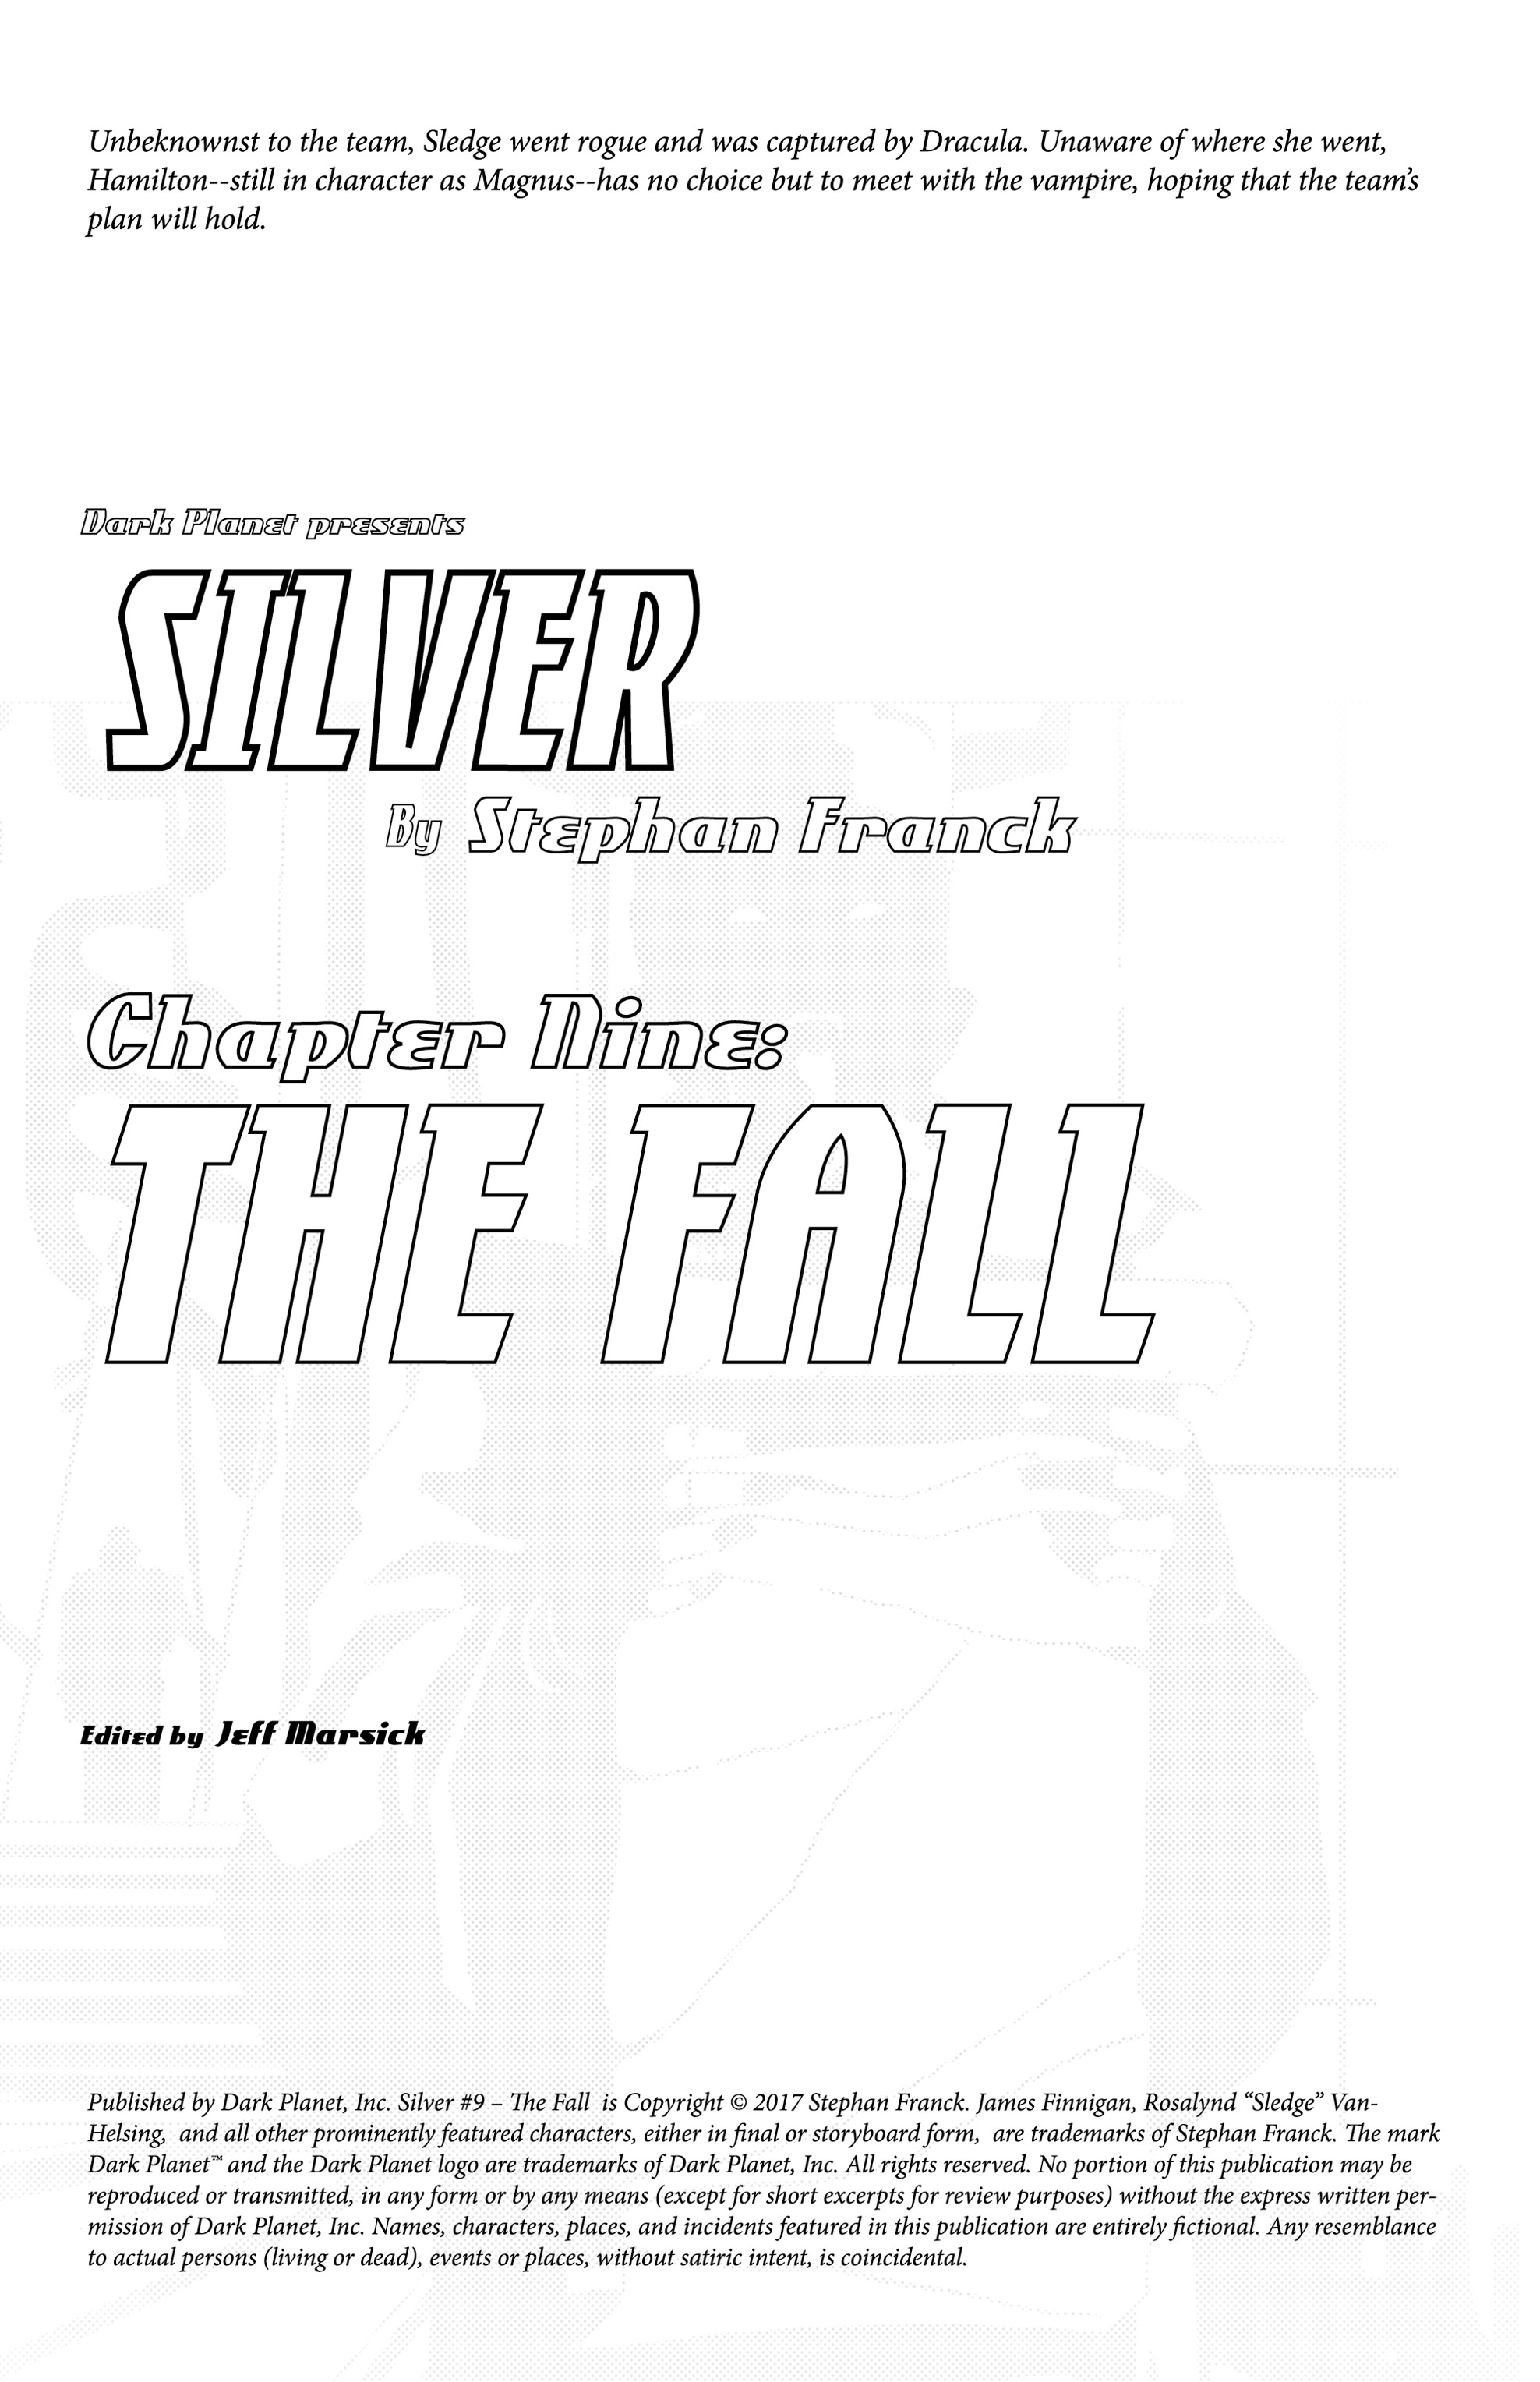 Silver 9 Page 1